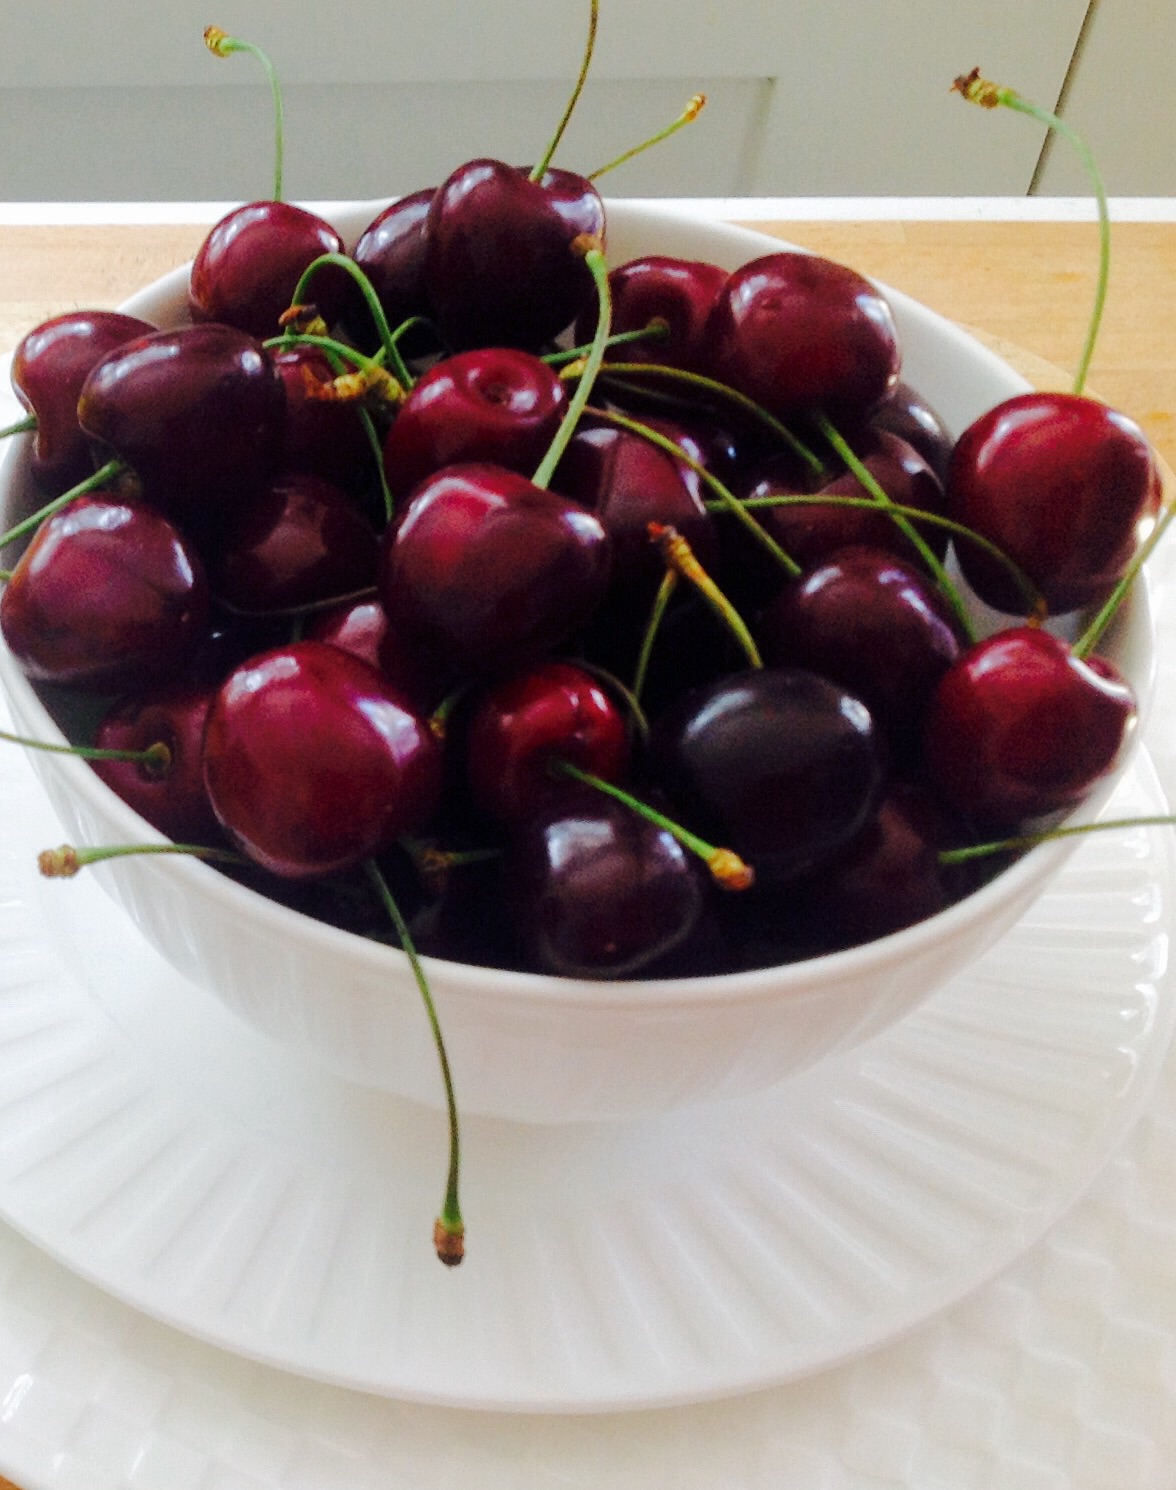 A bowl of Cherries